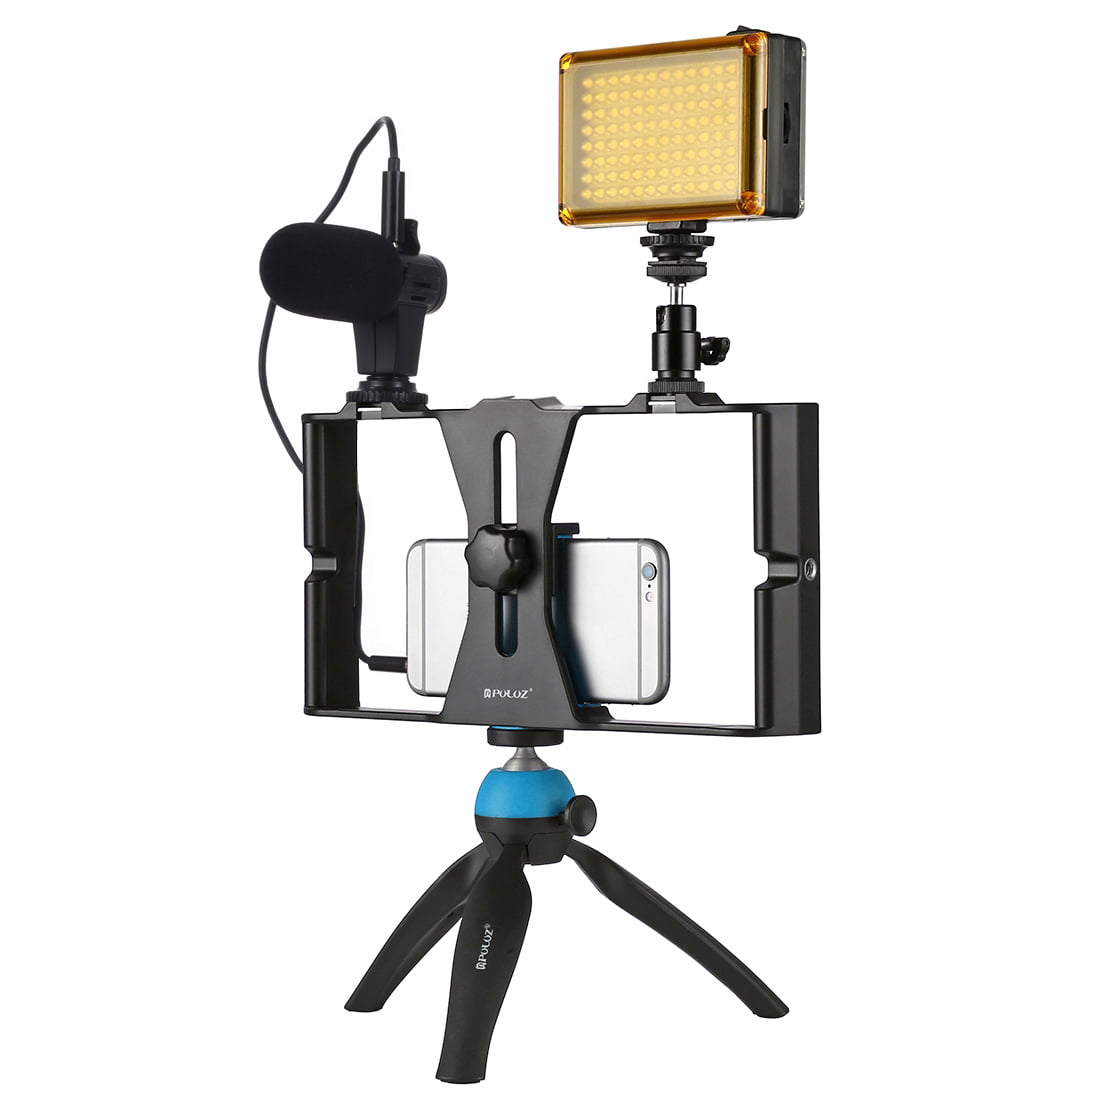 Xit Camera Flash Bracket For LED Light for Camera Video Light and Mic Tripod 